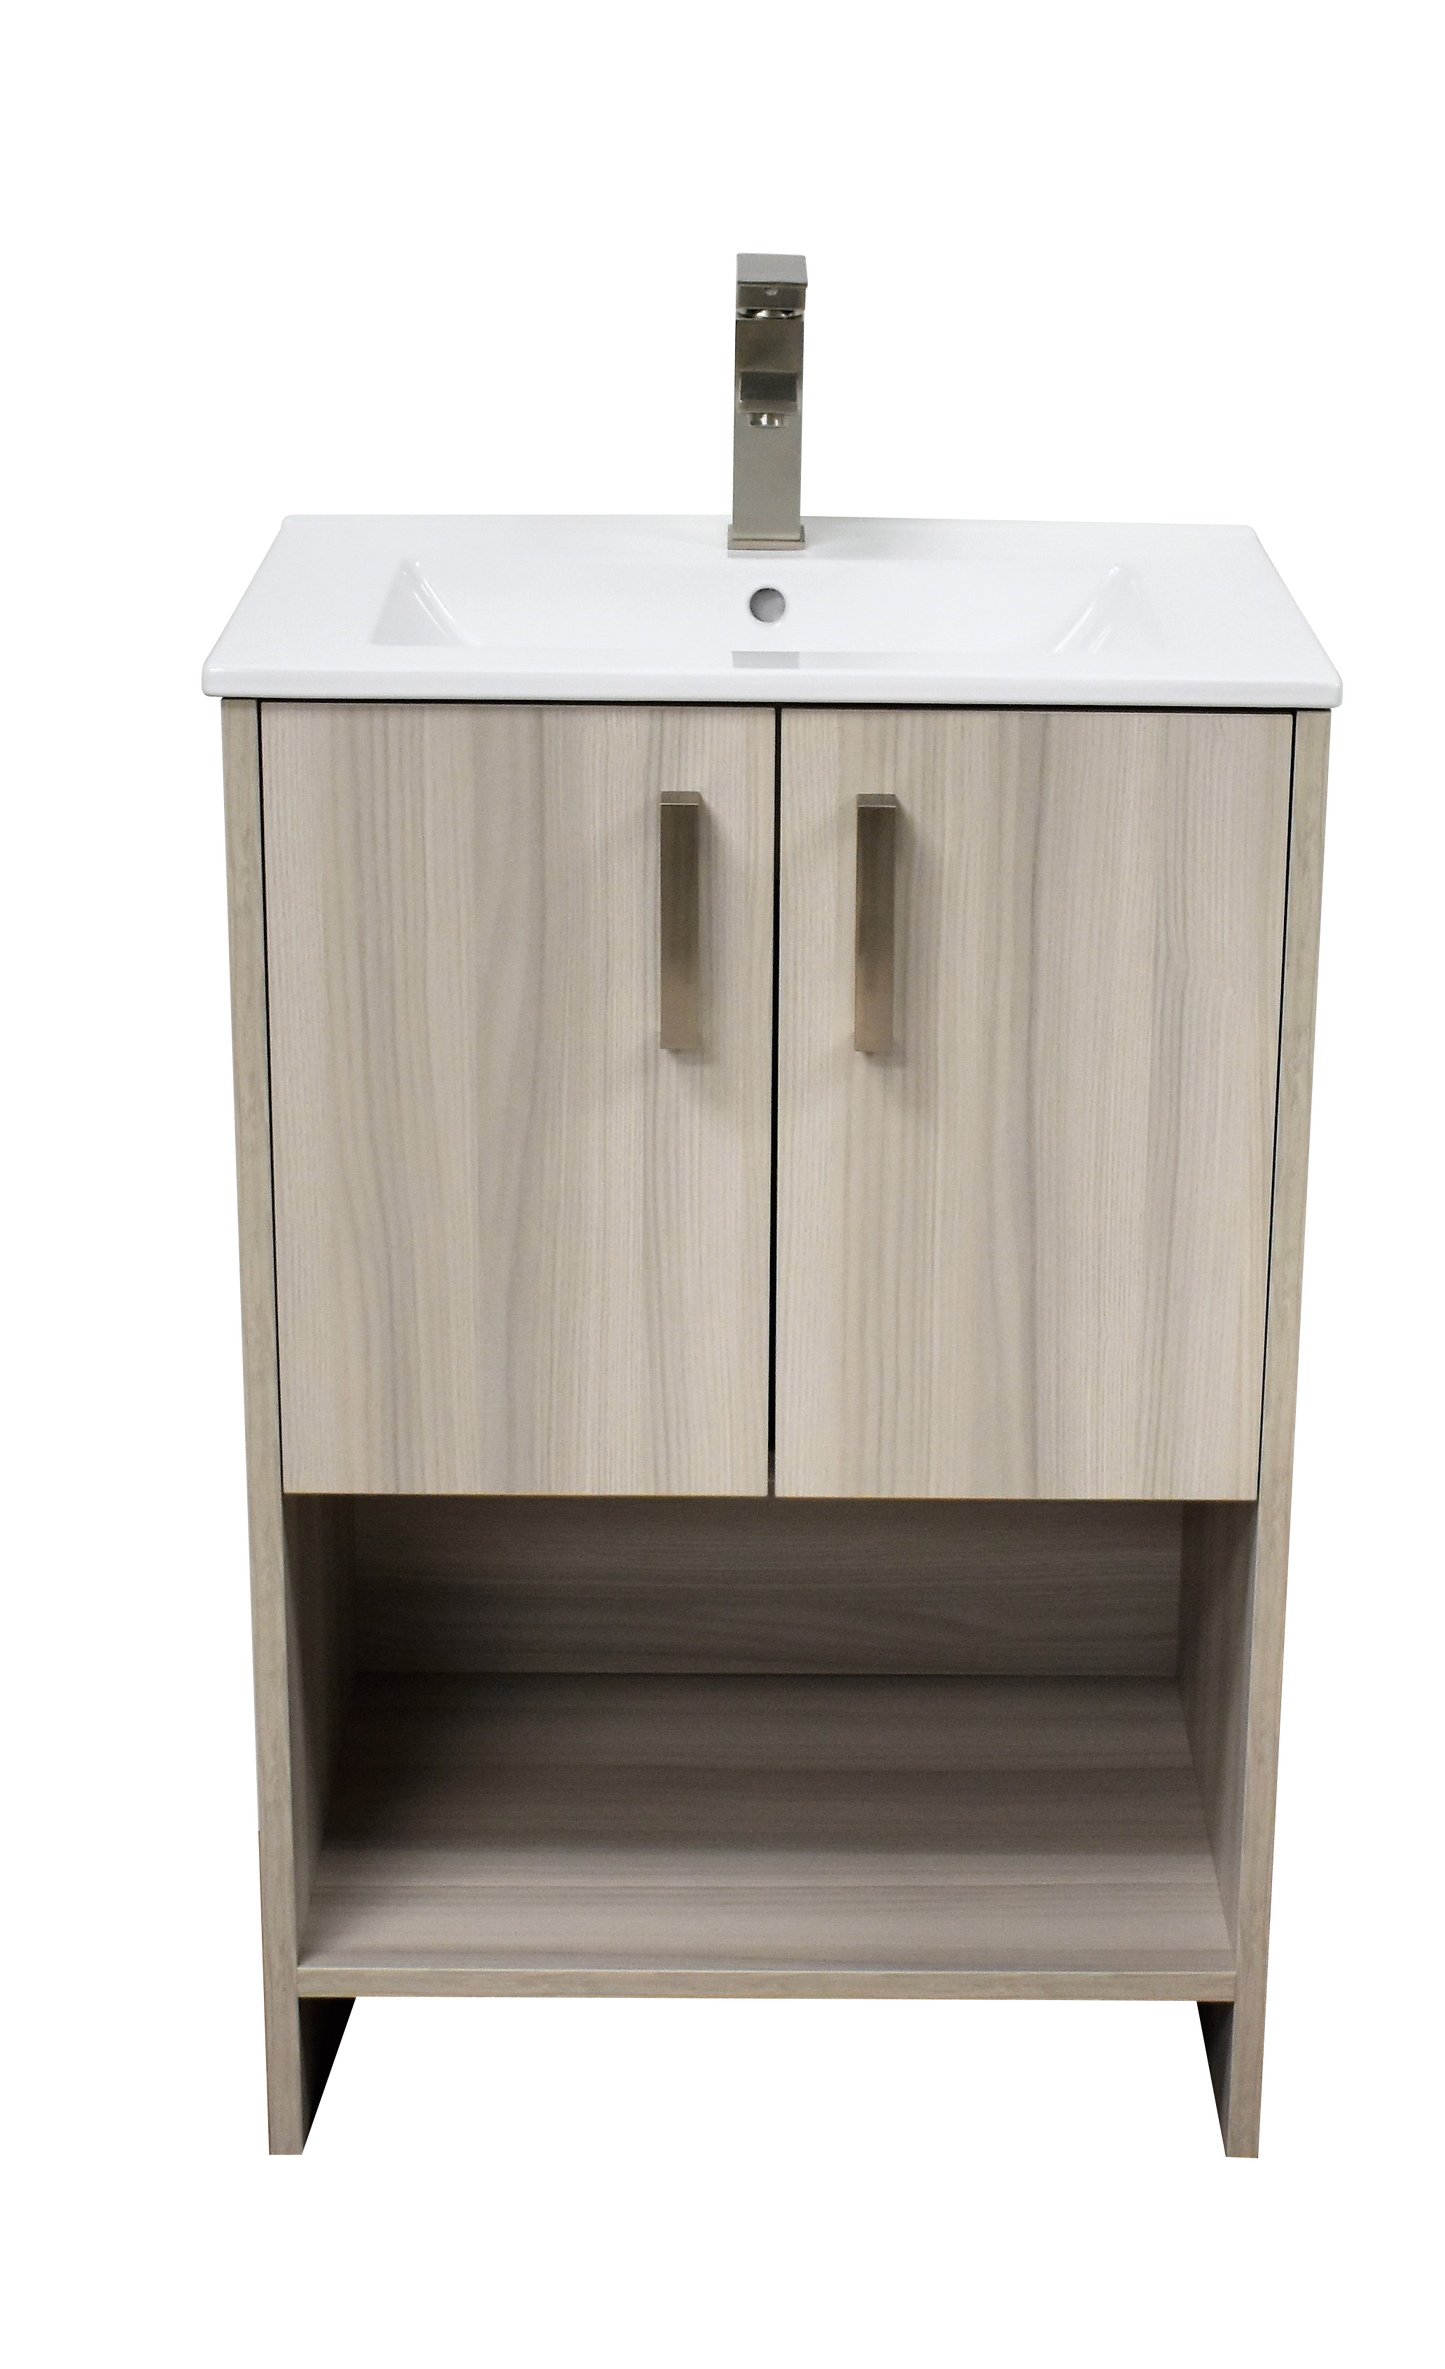 Volpa Cabo 24" Modern Bathroom Vanity with Integrated Ceramic Top and Brushed Nickel Handles - Luxe Bathroom Vanities Luxury Bathroom Fixtures Bathroom Furniture